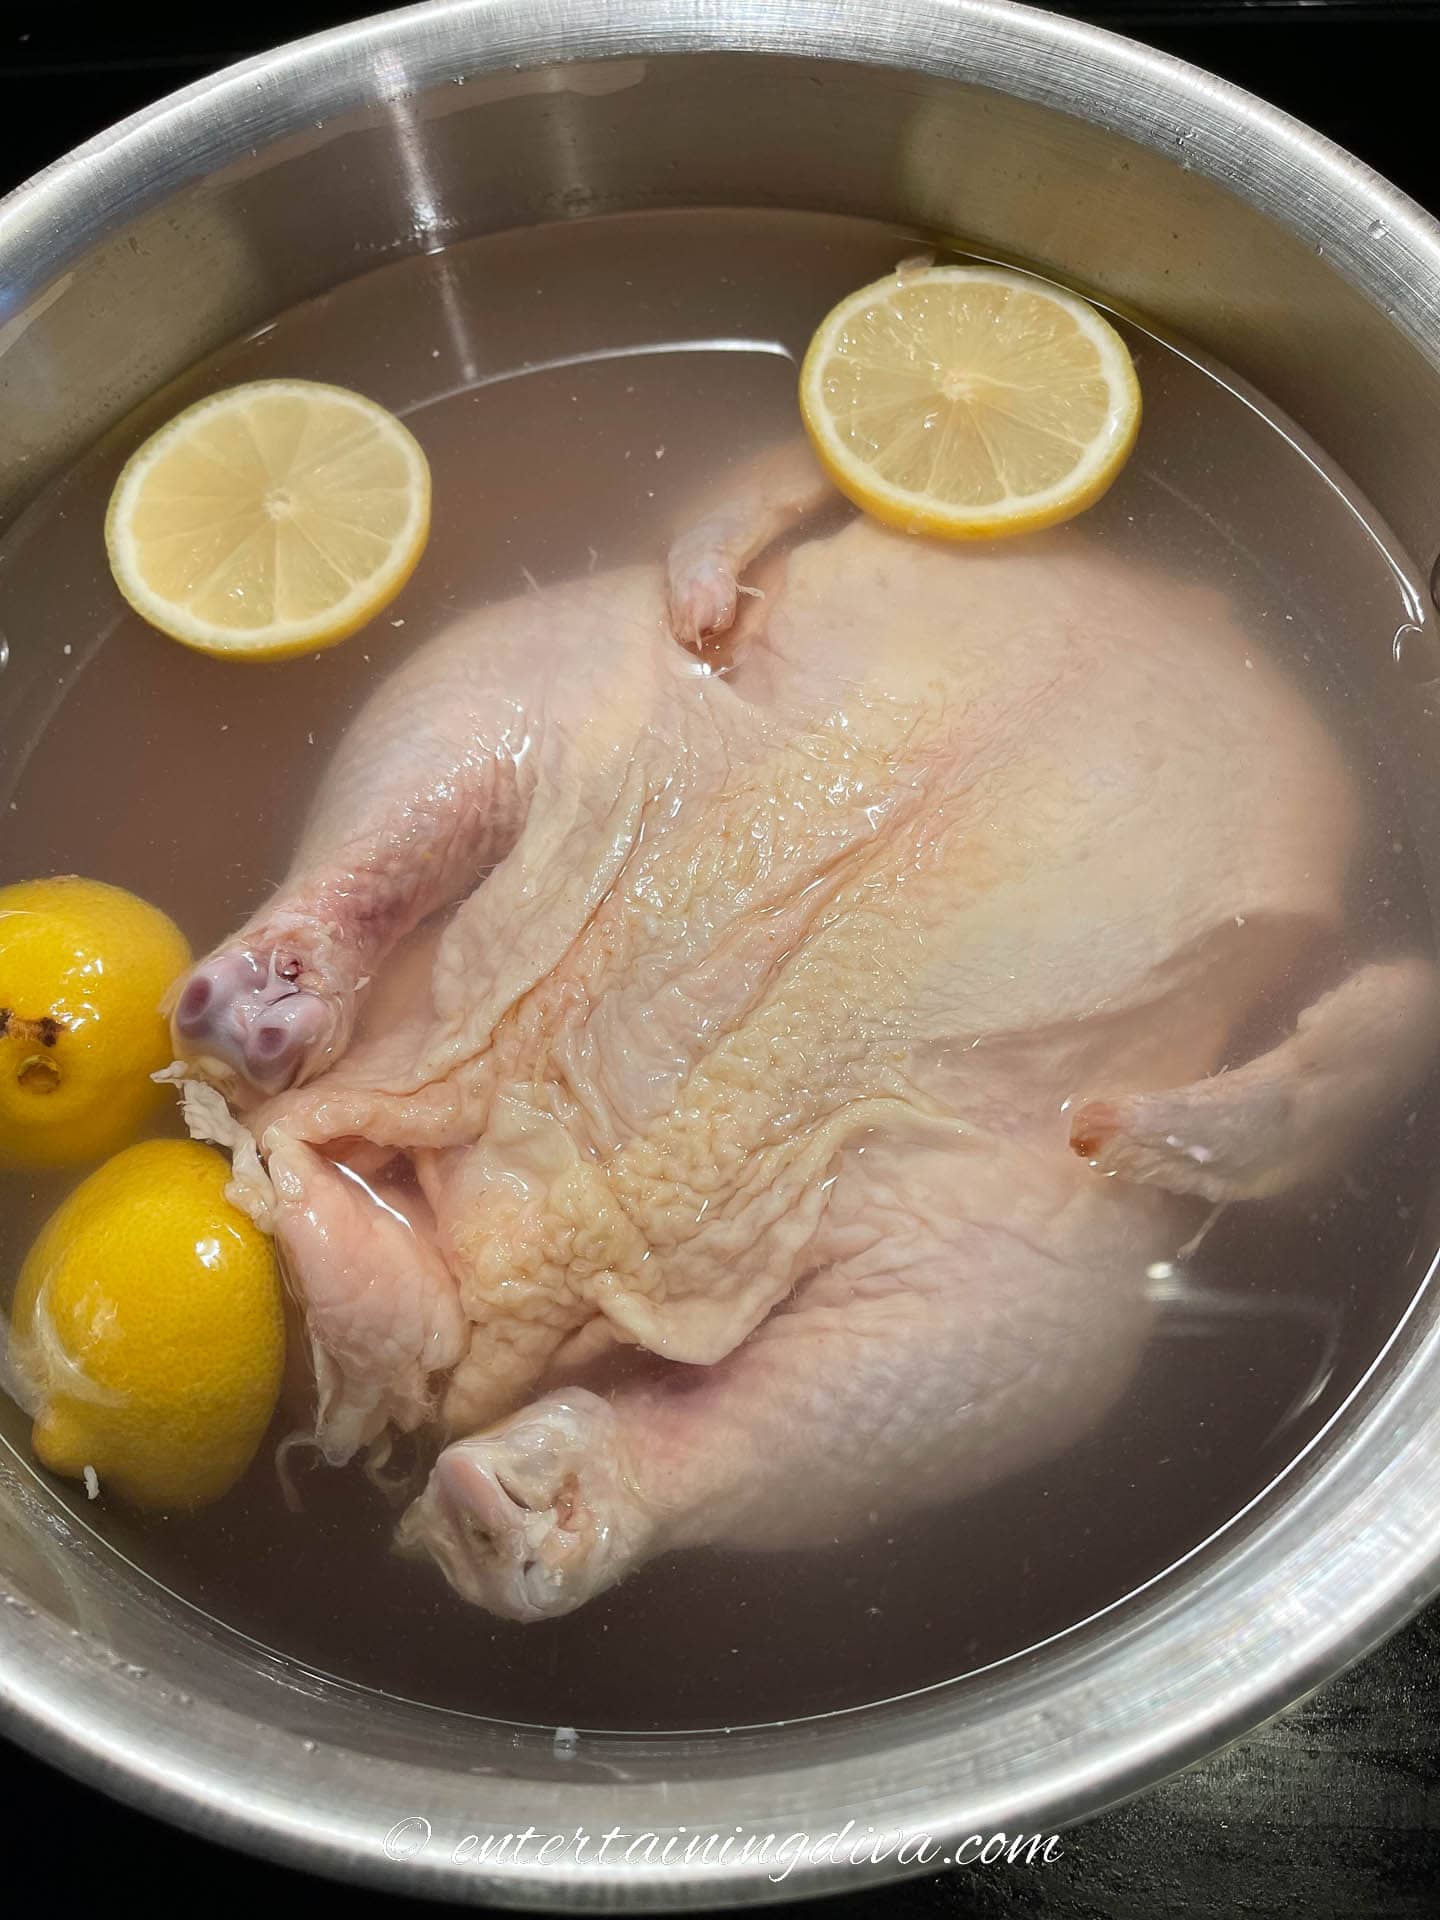 Turkey brining in a pot with lemons